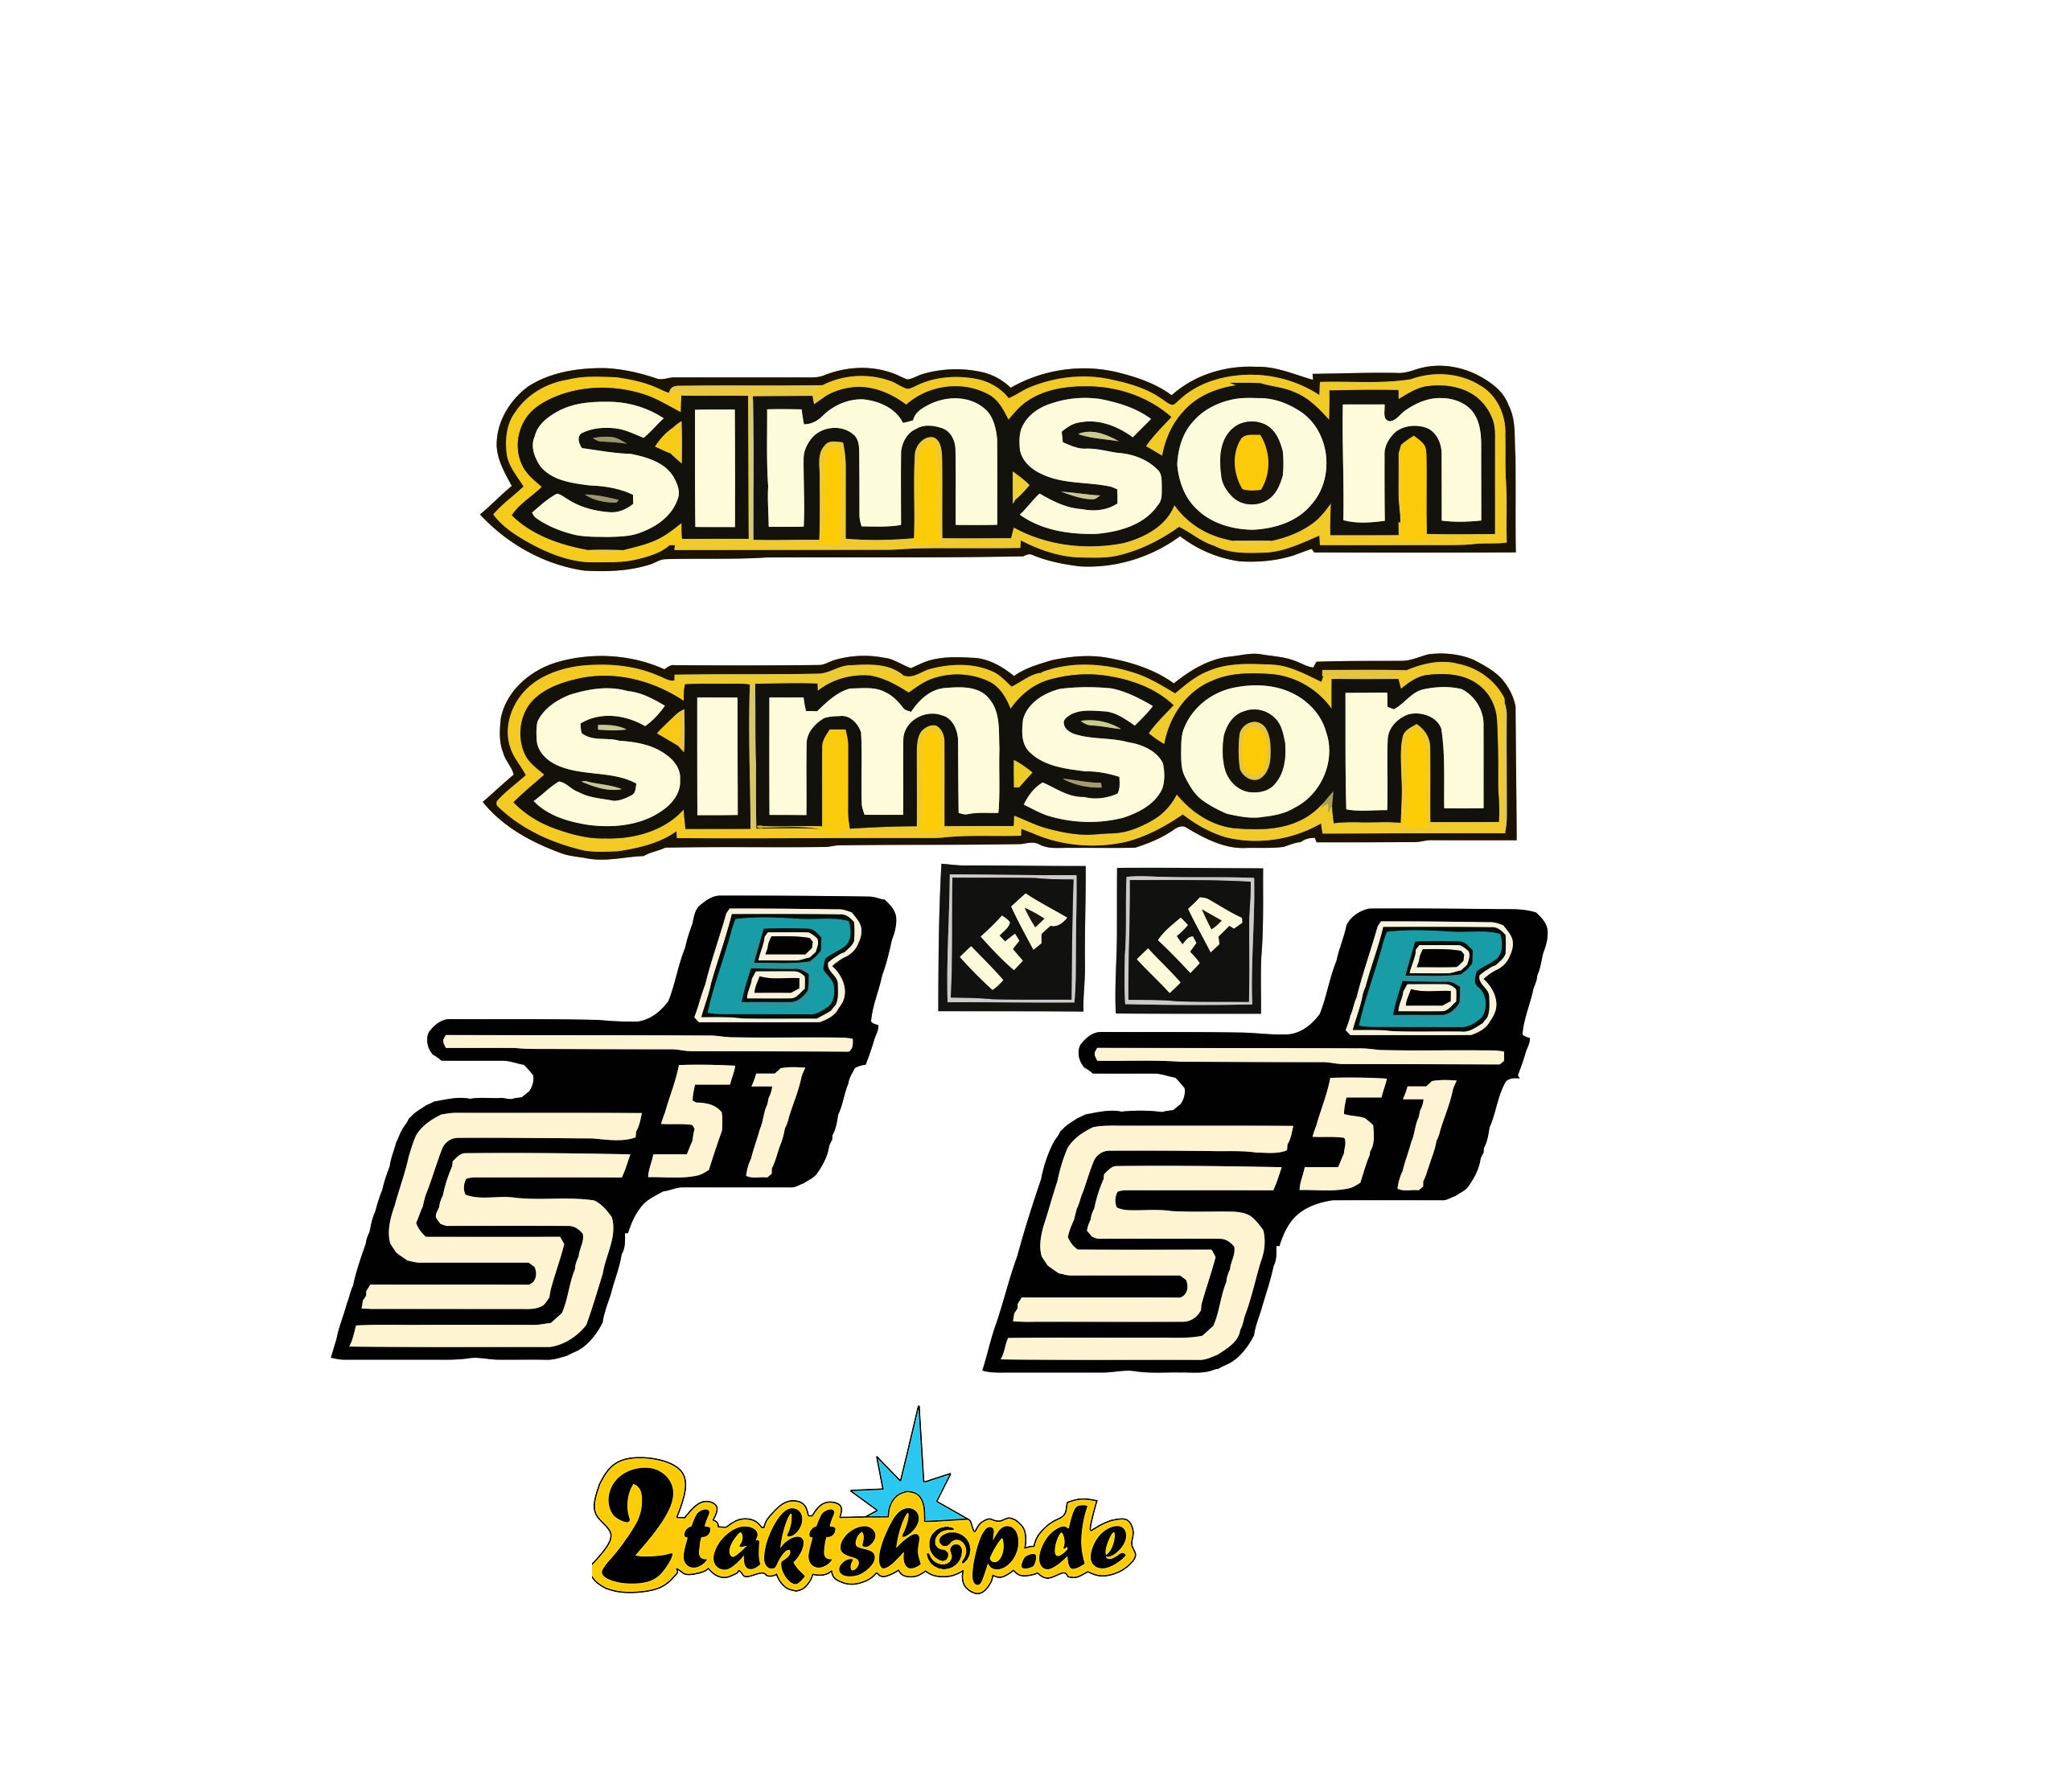 Set: Tank and side Lid Sticker adhesive film SIMSON S51